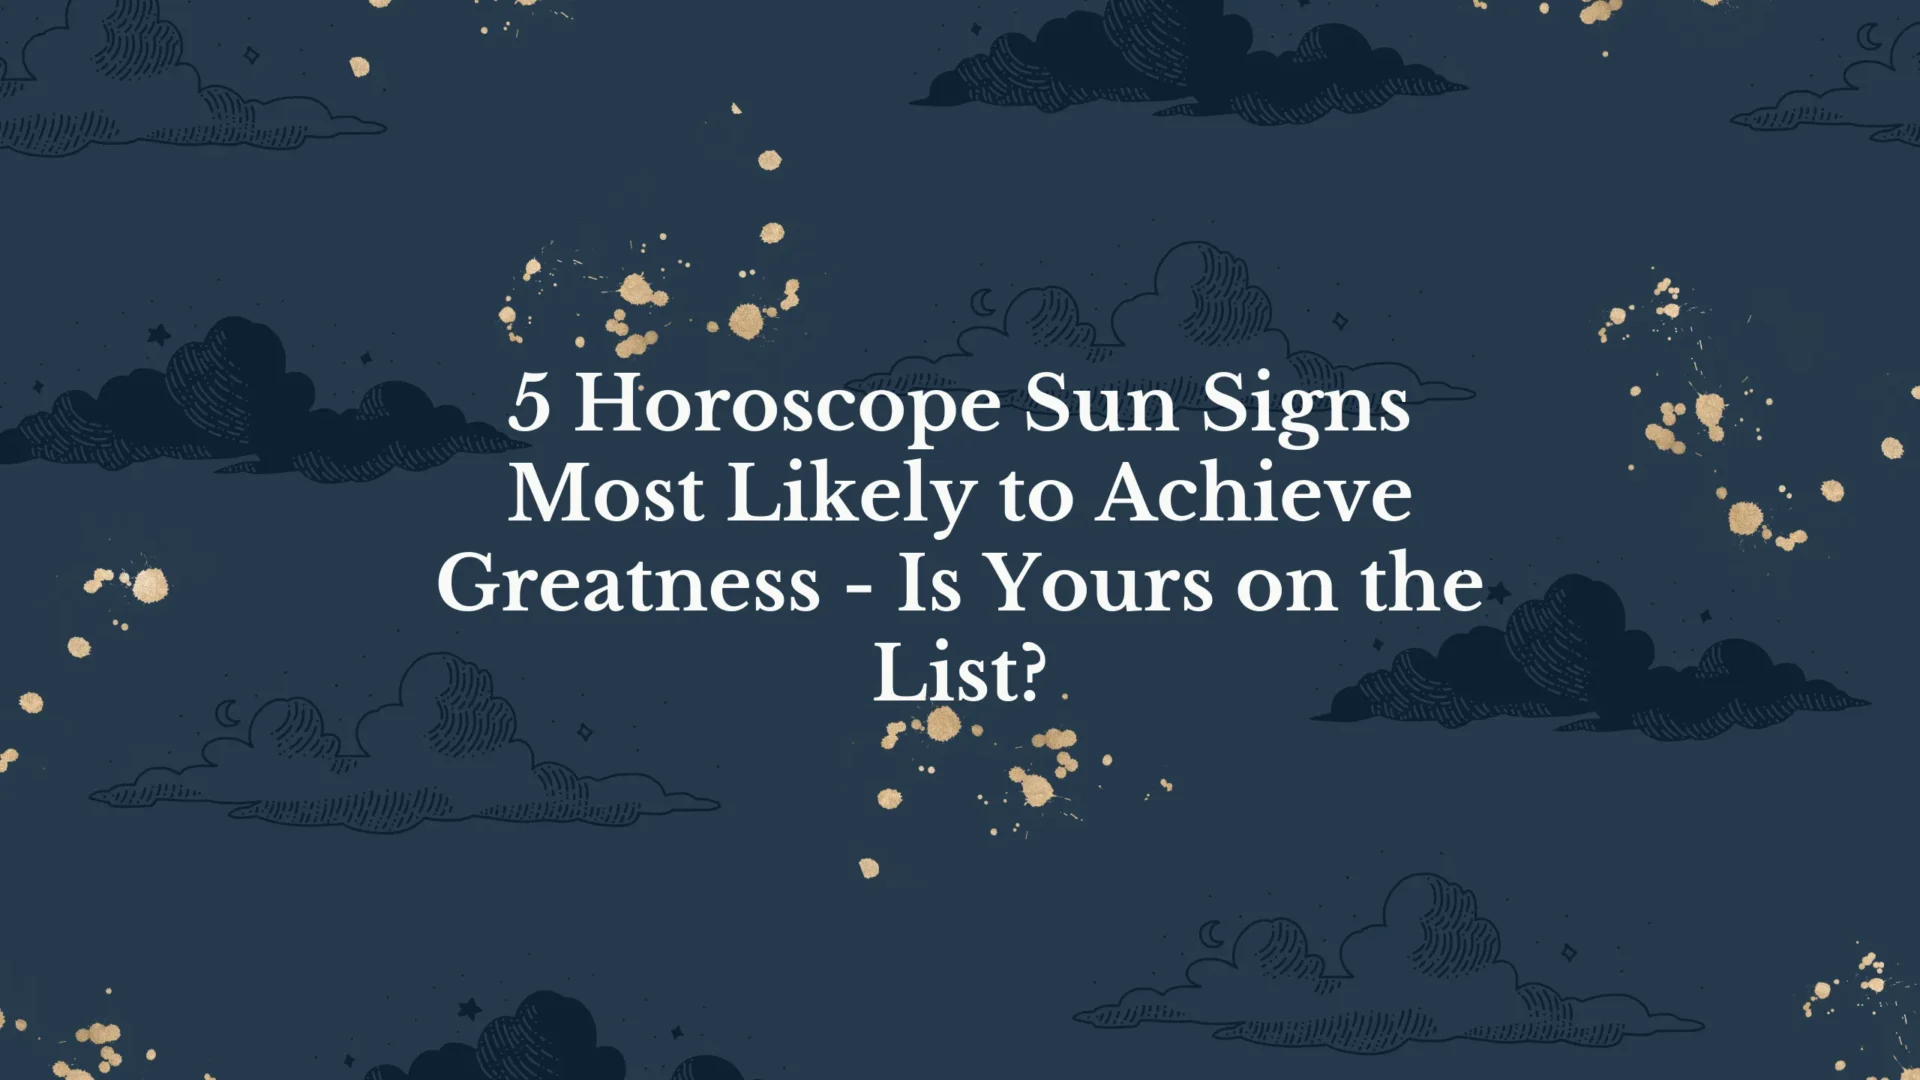 5 Horoscope Sun Signs Most Likely to Achieve Greatness - Is Yours on the List?